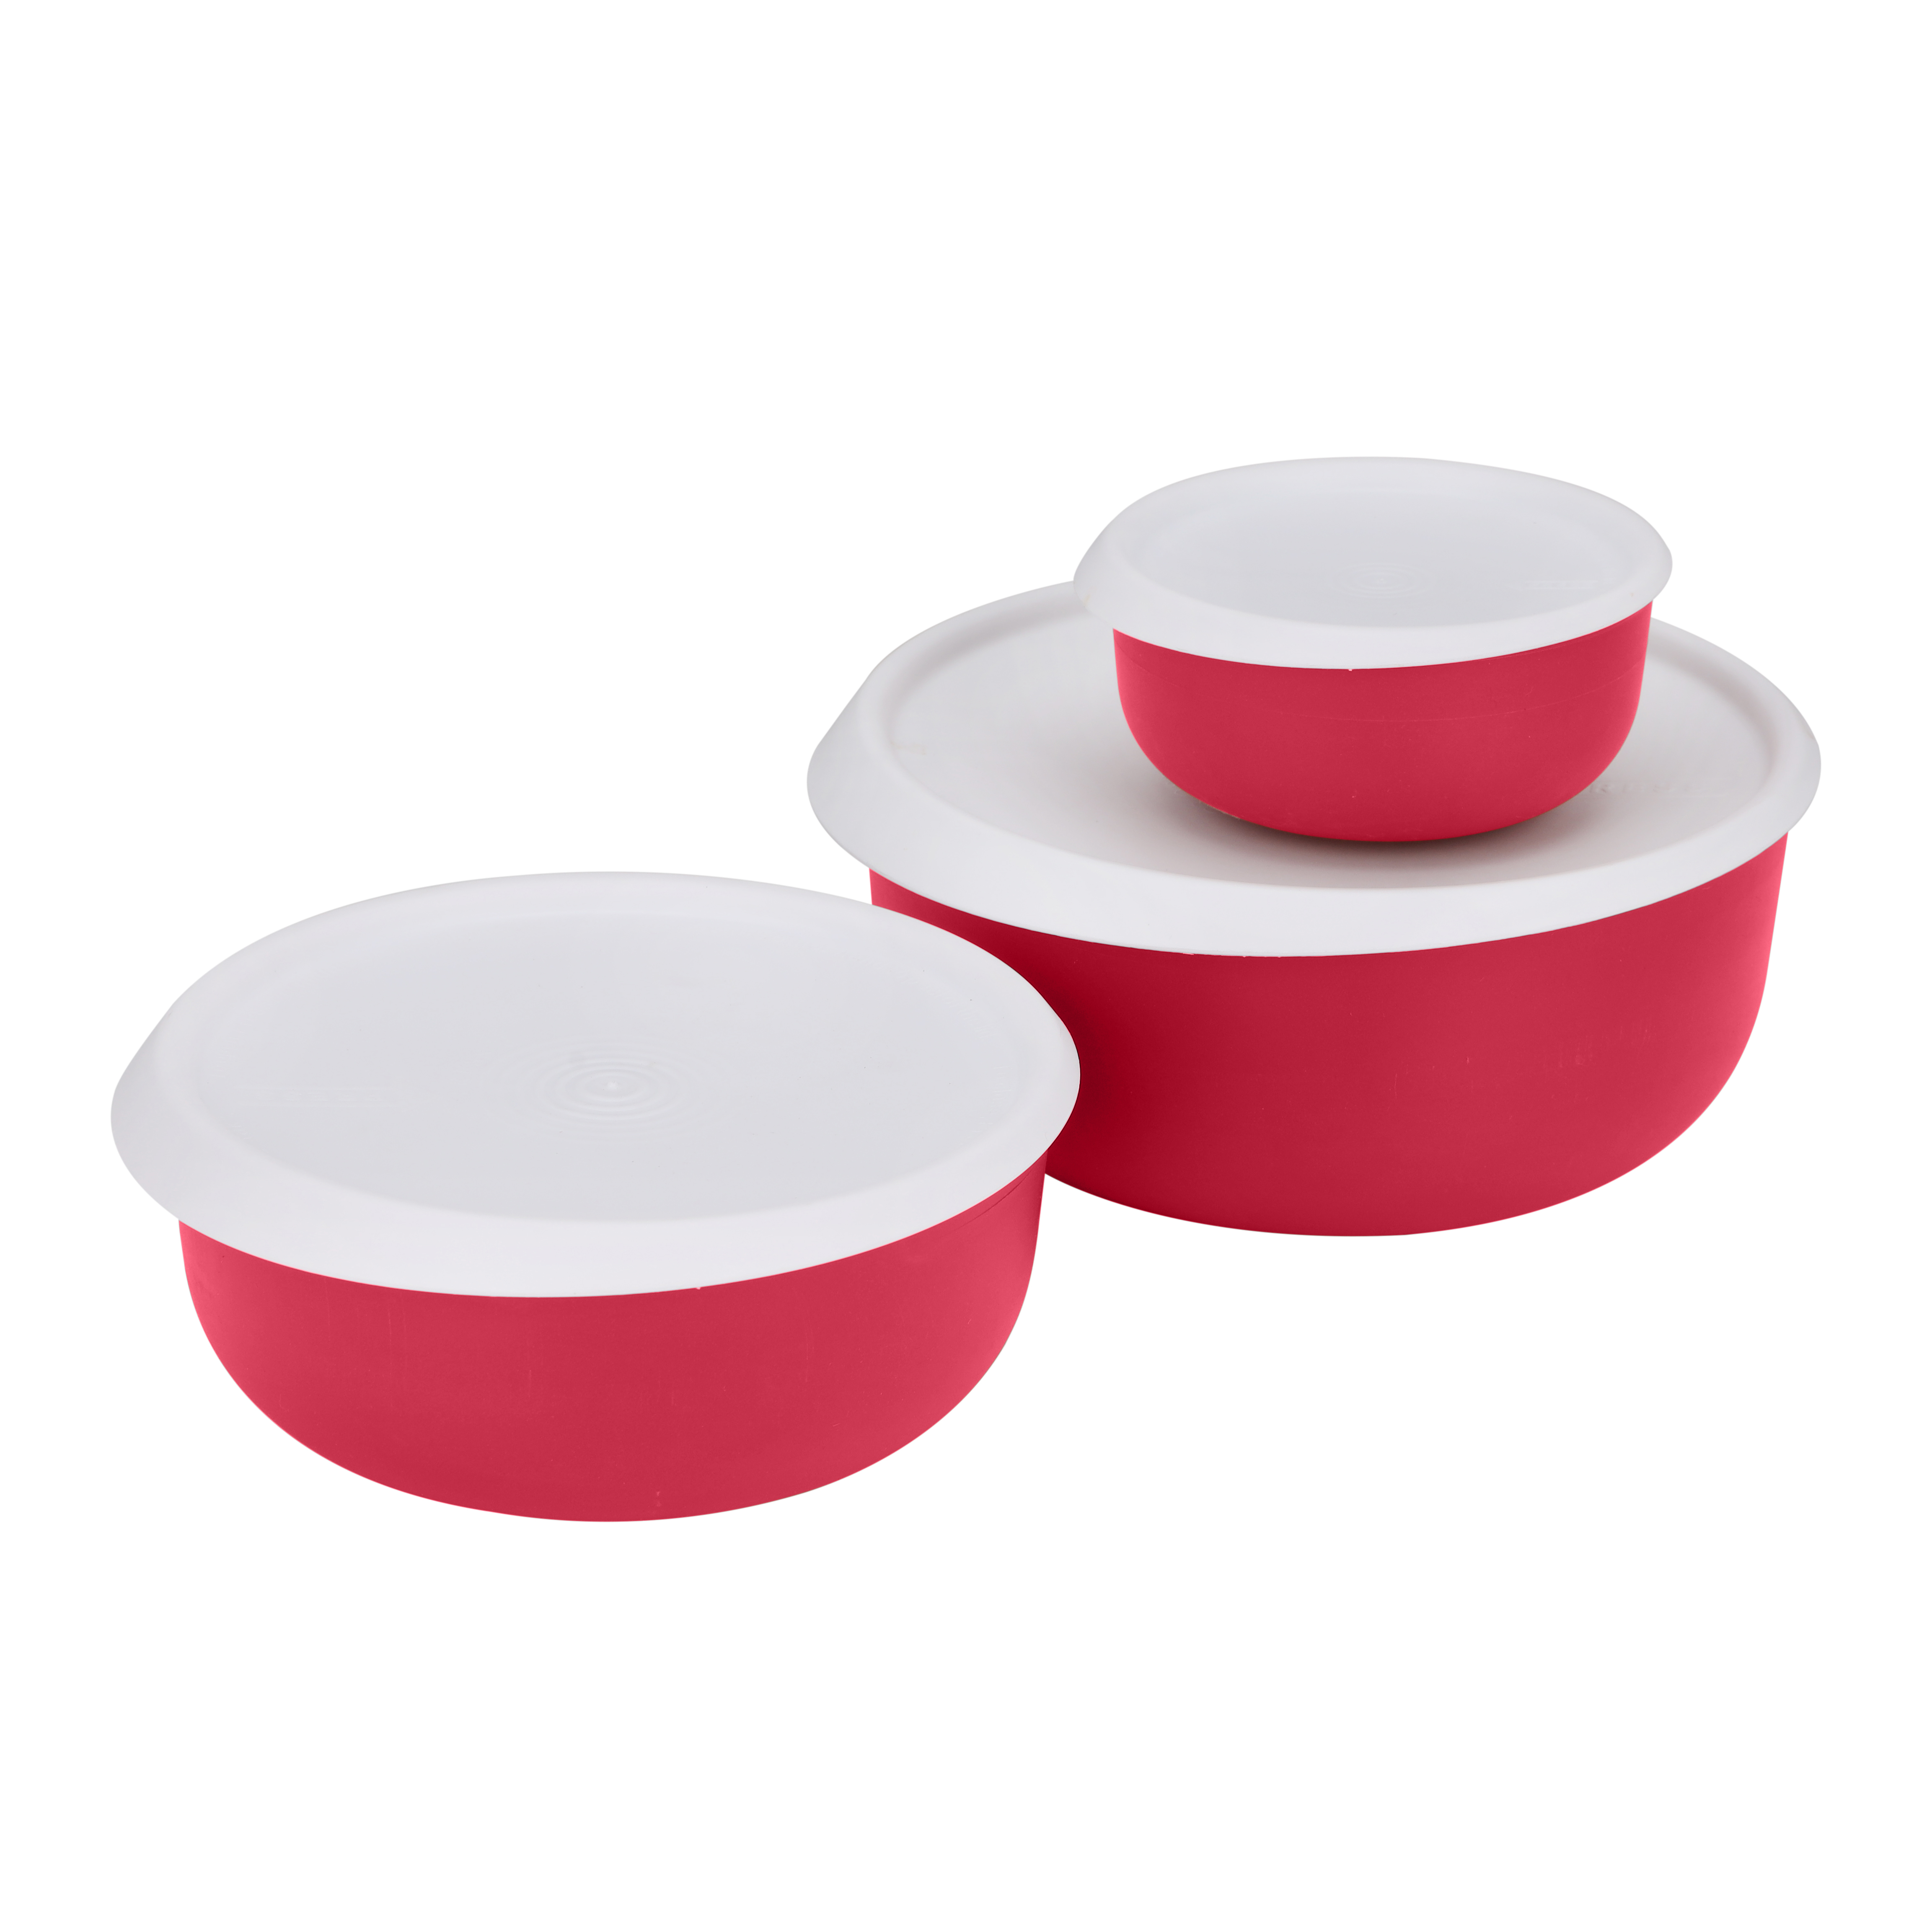 3pcs Bowl Set with Air-Tight Lid, Food Container, RF11007, Classic Prep  Bowls with Lids, Food Storage Container